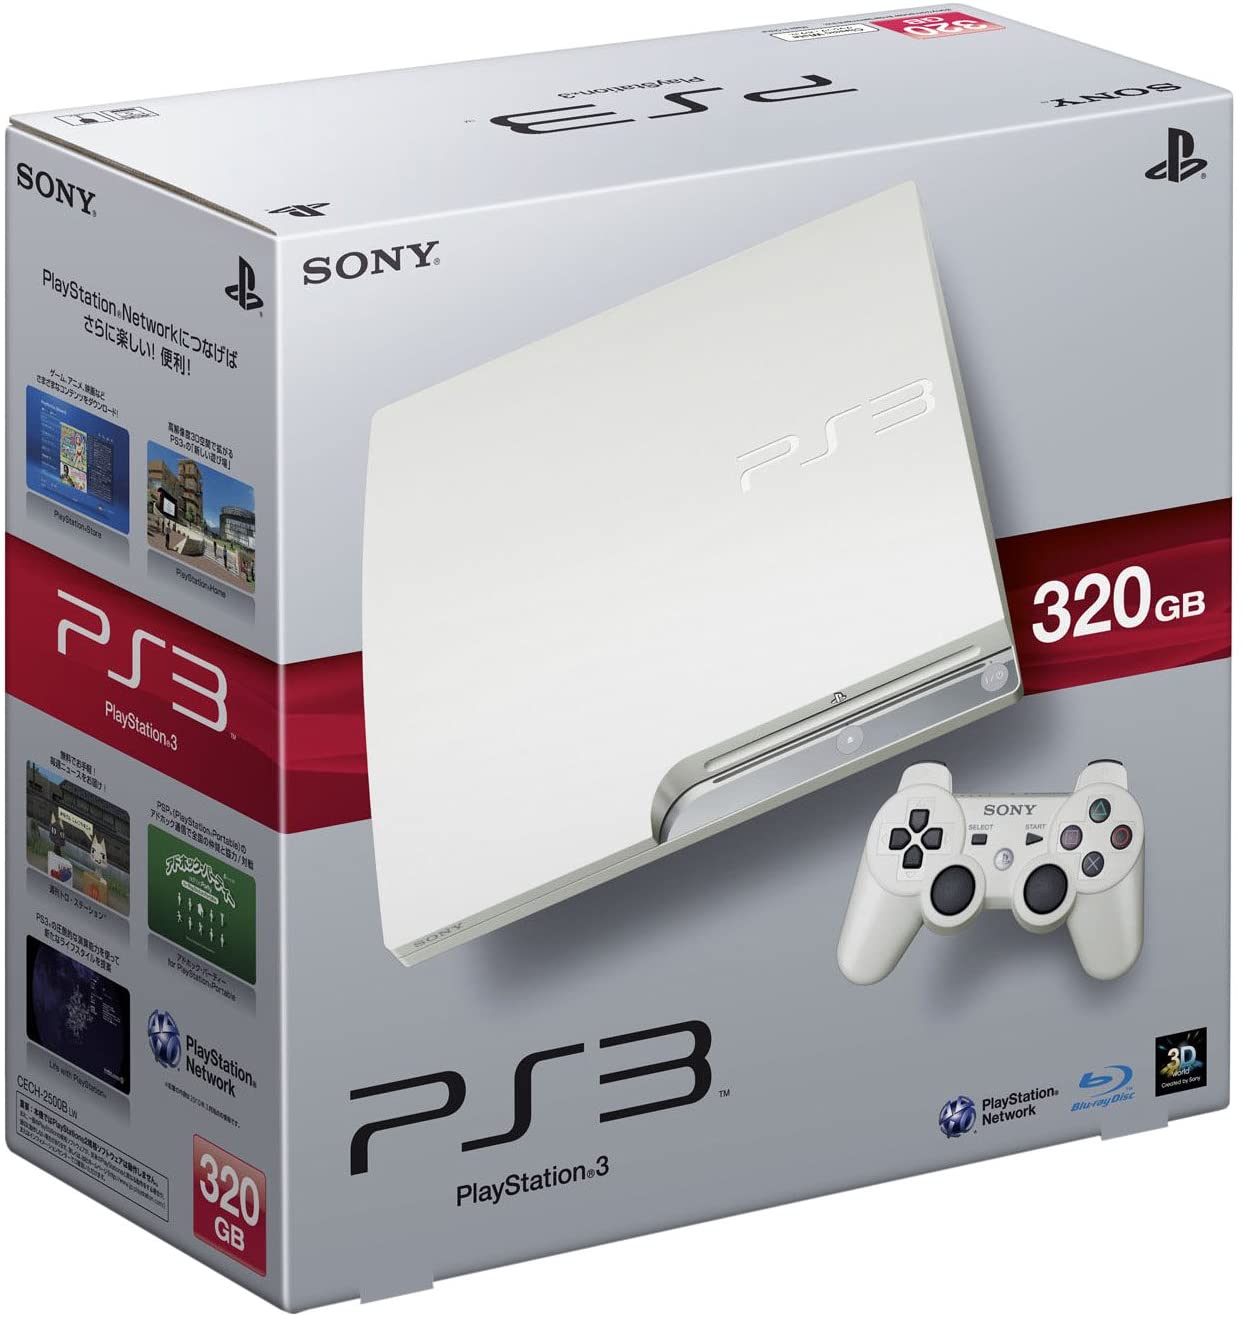 PlayStation 3 (320GB) Classic White (CECH-2500BLW) - Discovery